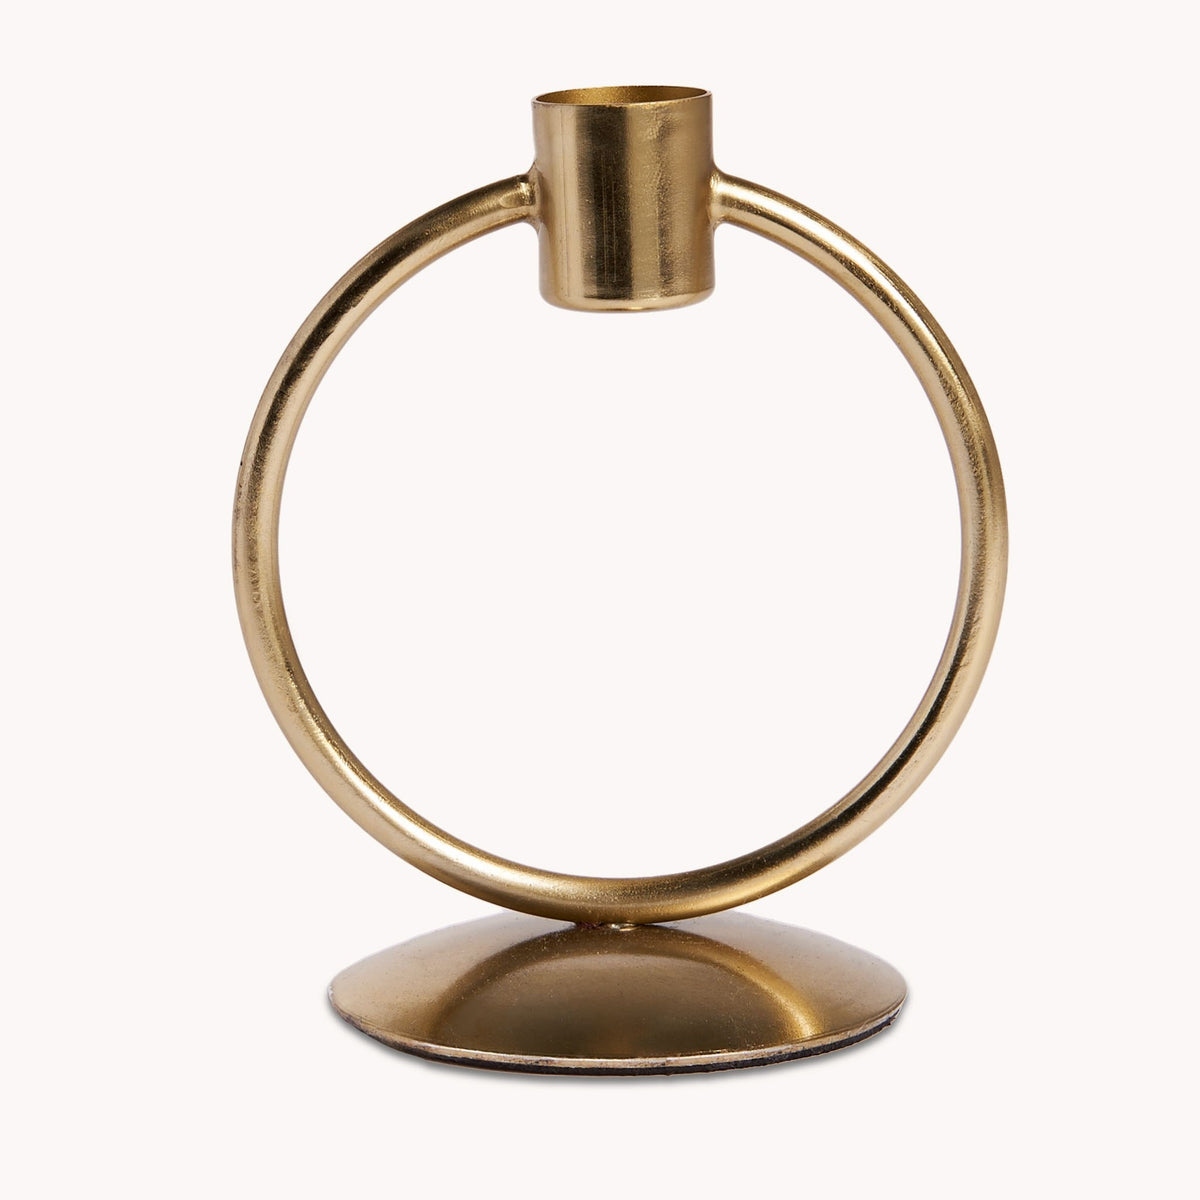 Gold Circle Candle Holder | Shop Pokoloko home décor at boogie + birdie